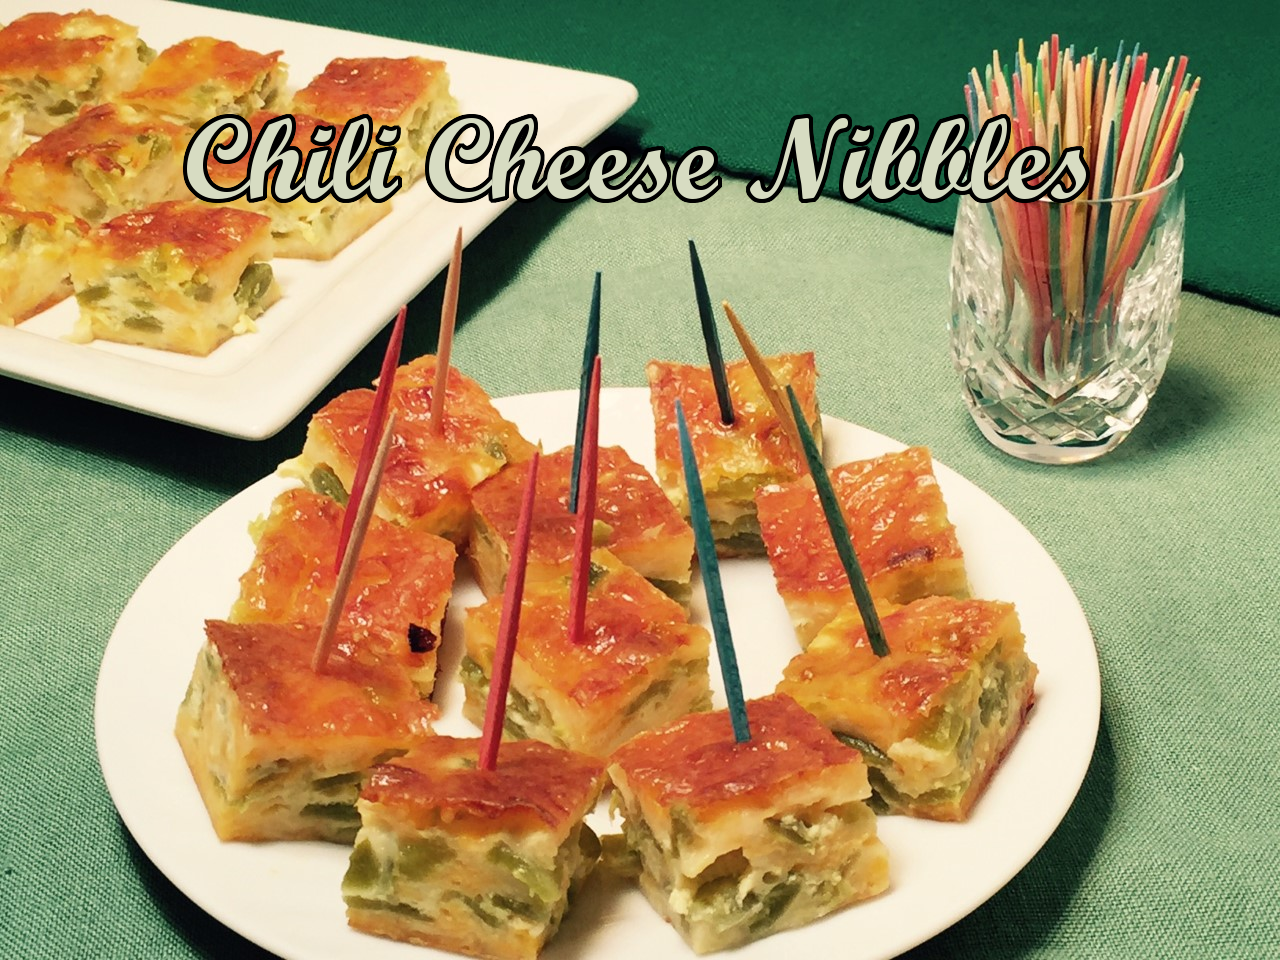 chili-cheese-nibbles-text